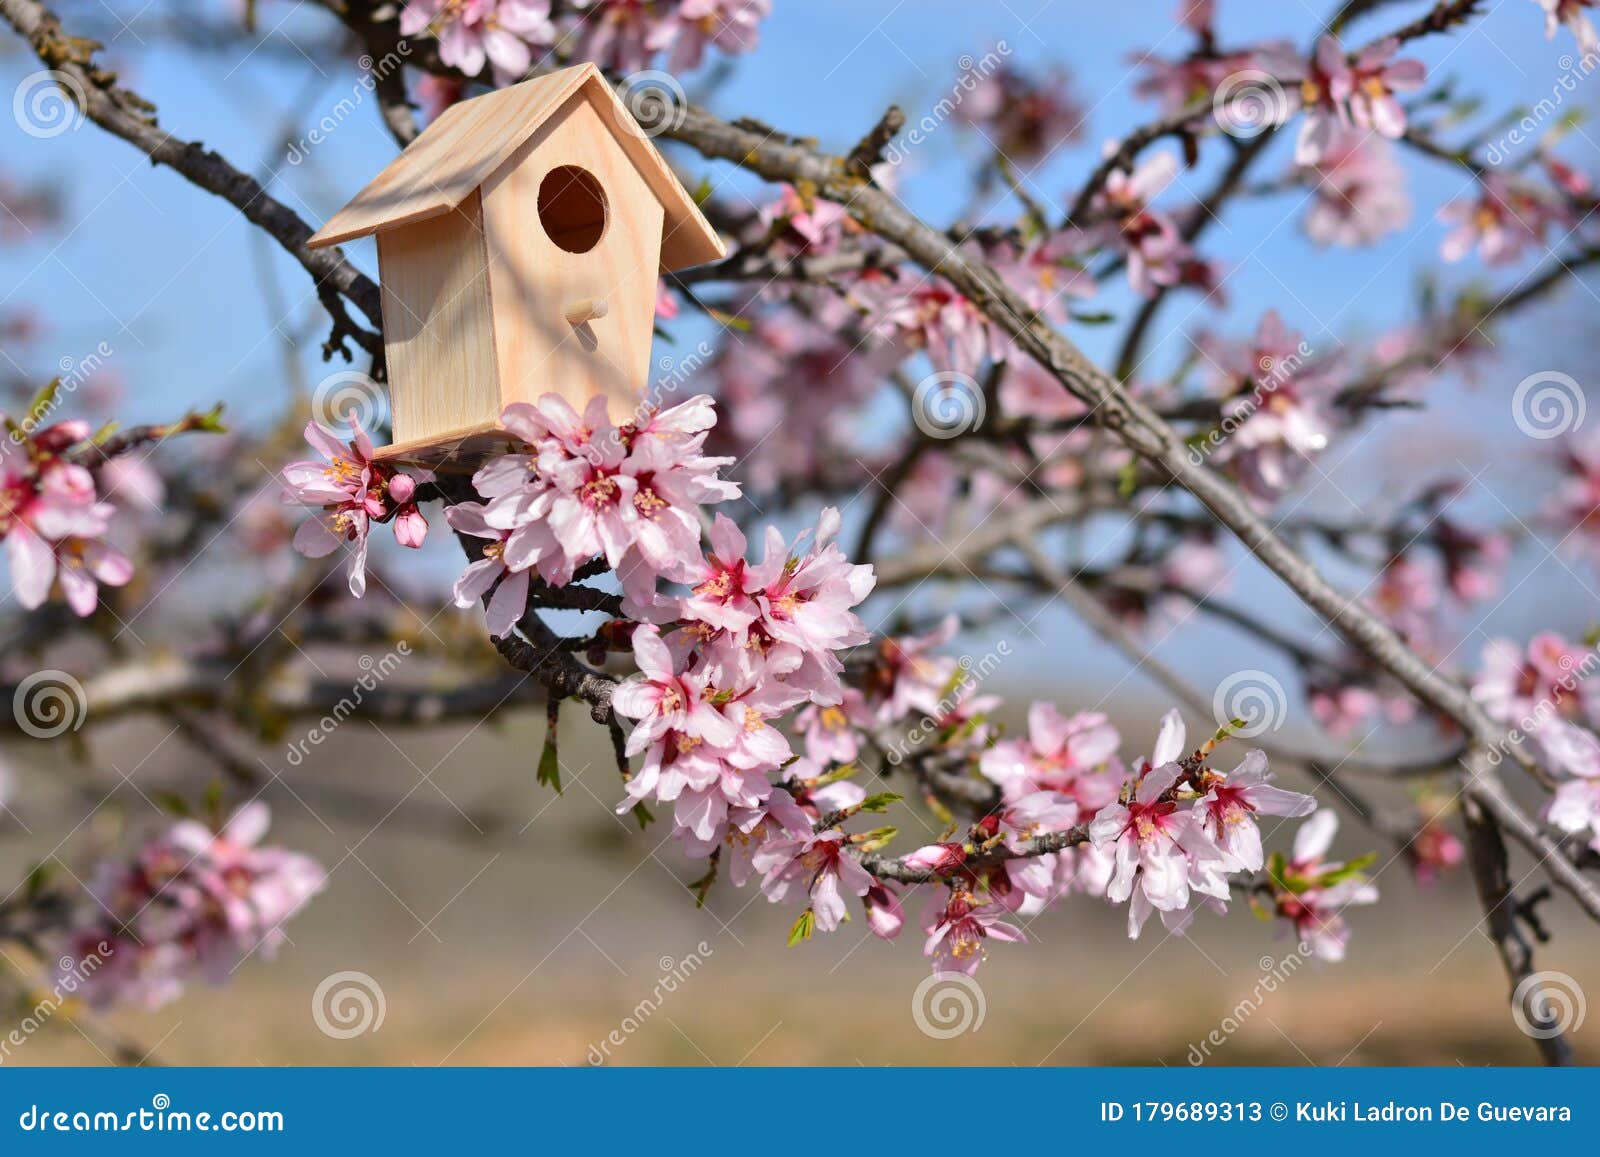 nest house, in a tree full of almond blossoms